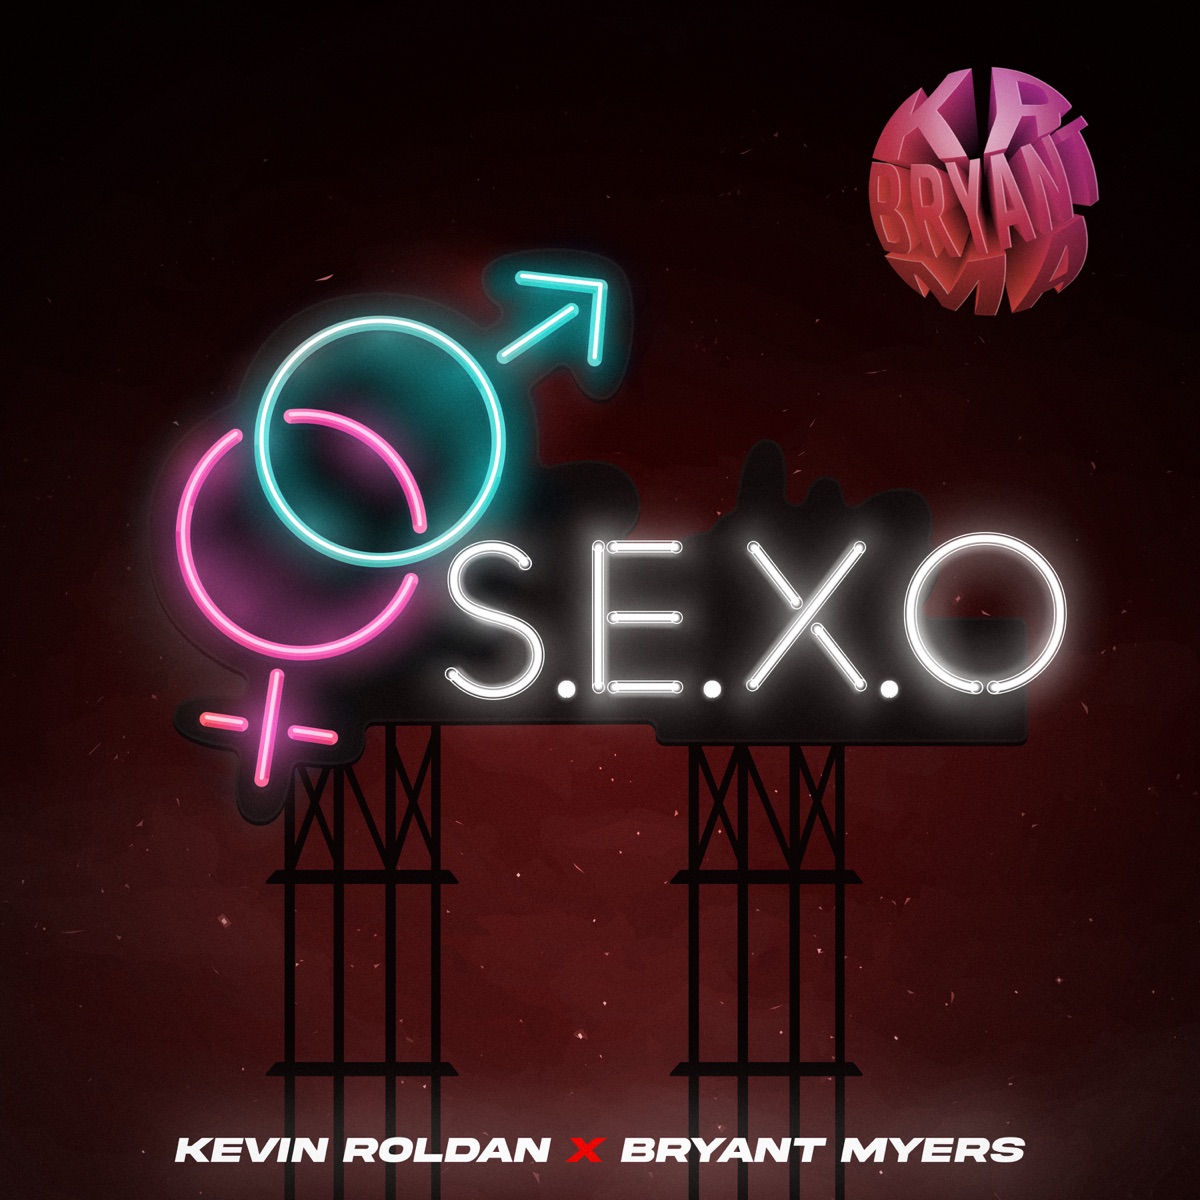 S.E.X.O - Single by KEVIN ROLDAN & Bryant Myers on Apple Music